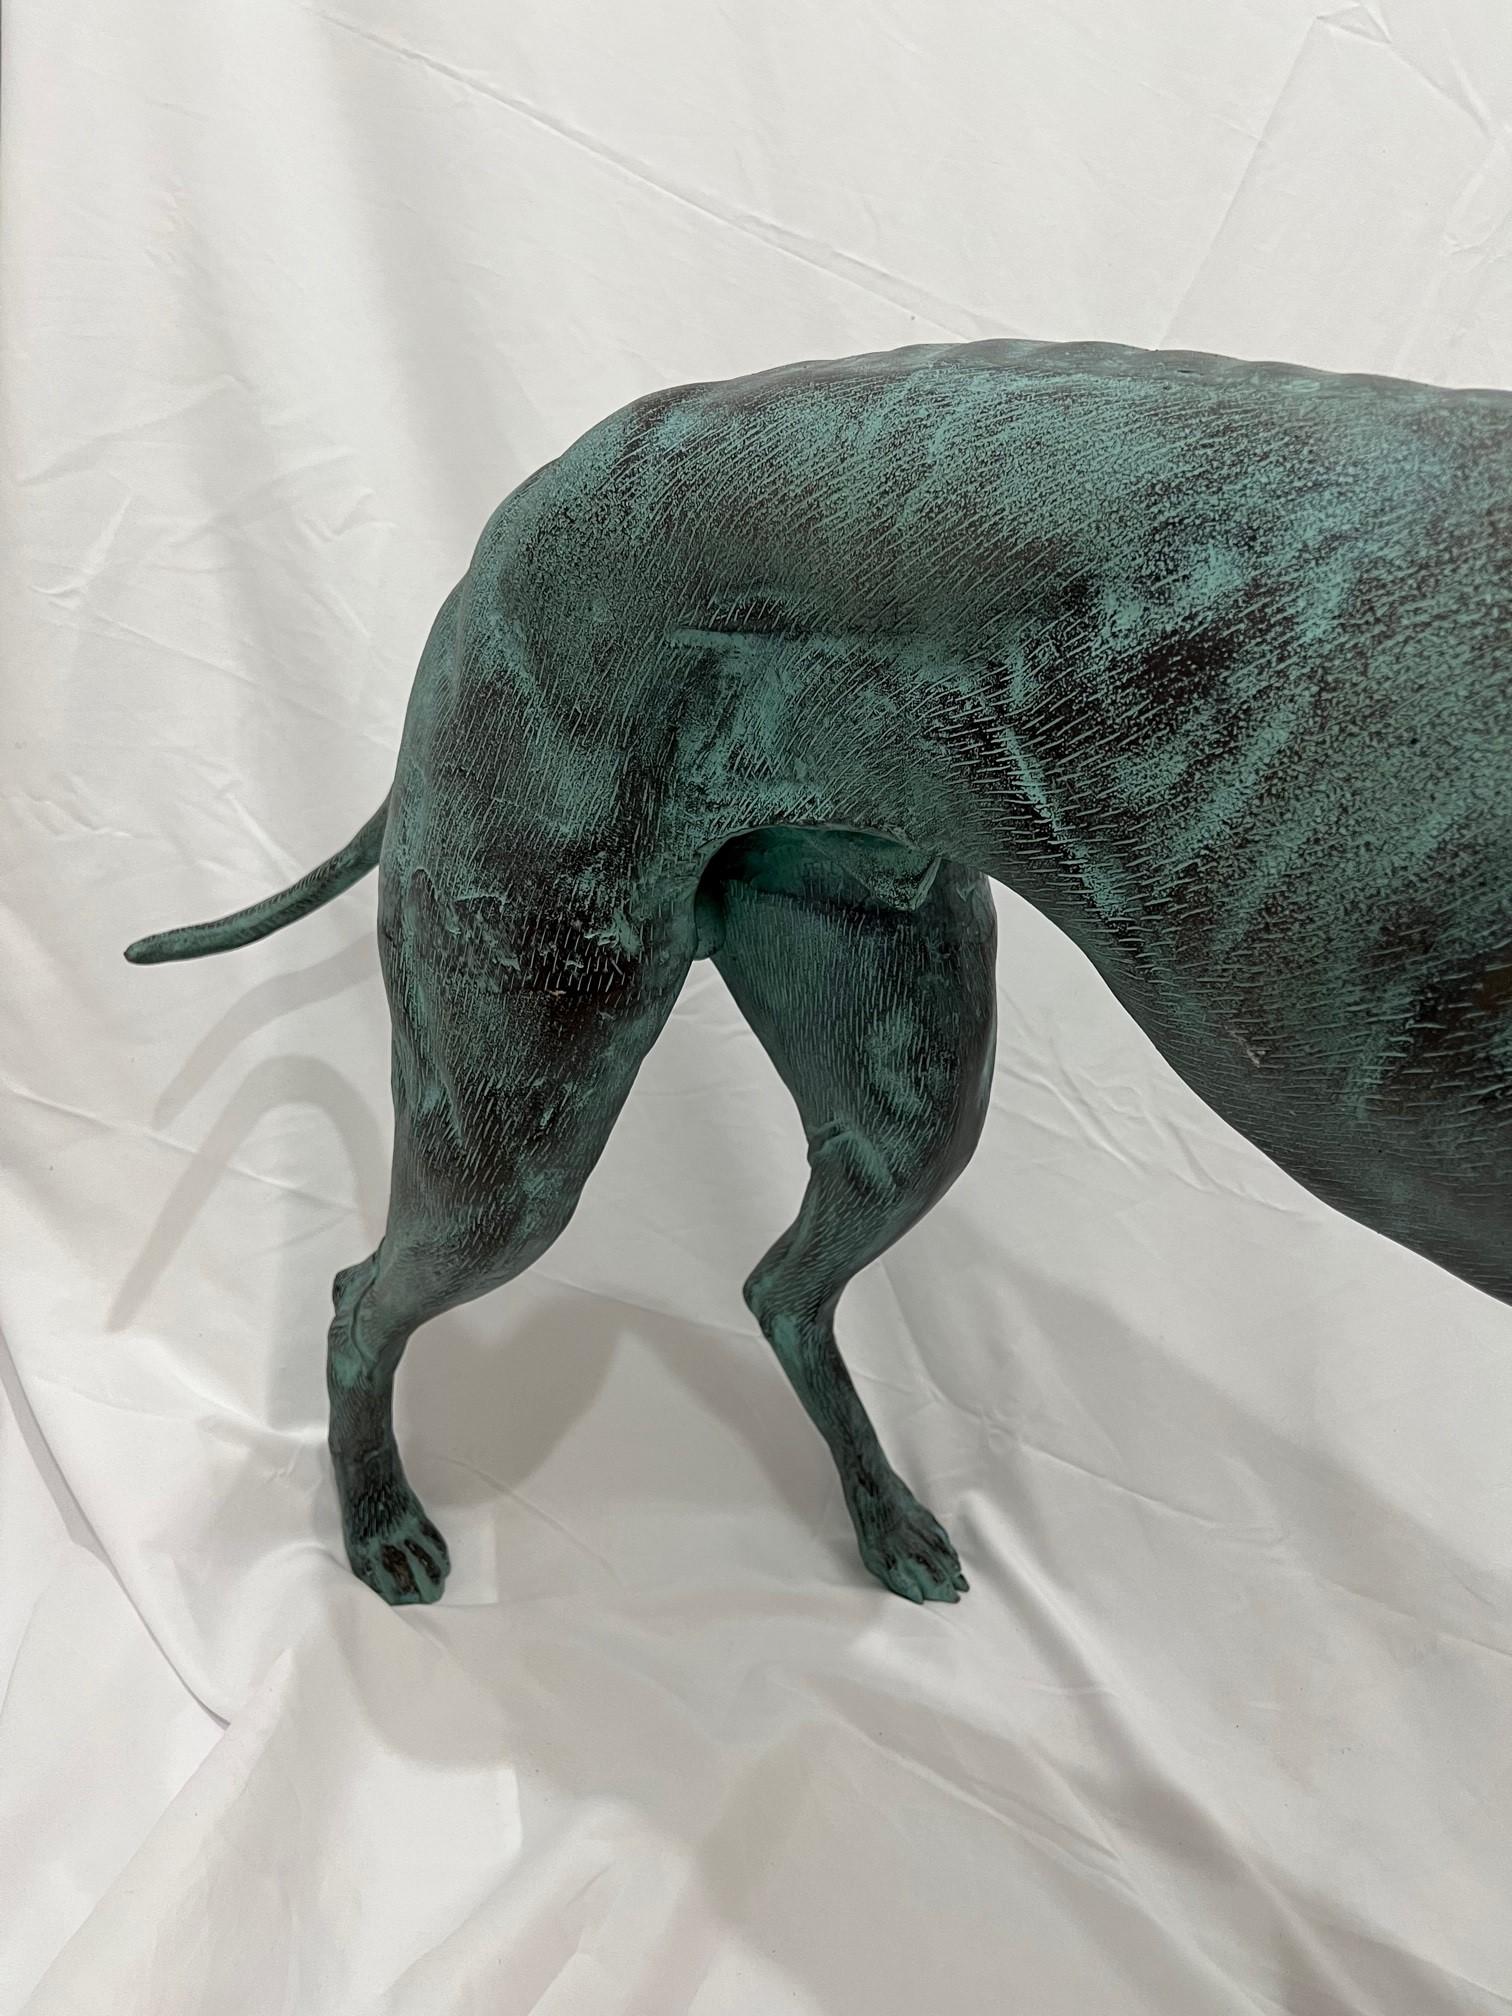 Thai Late 20th Century Bronze Life Size Greyhound Dog Statue with a Green Patina For Sale